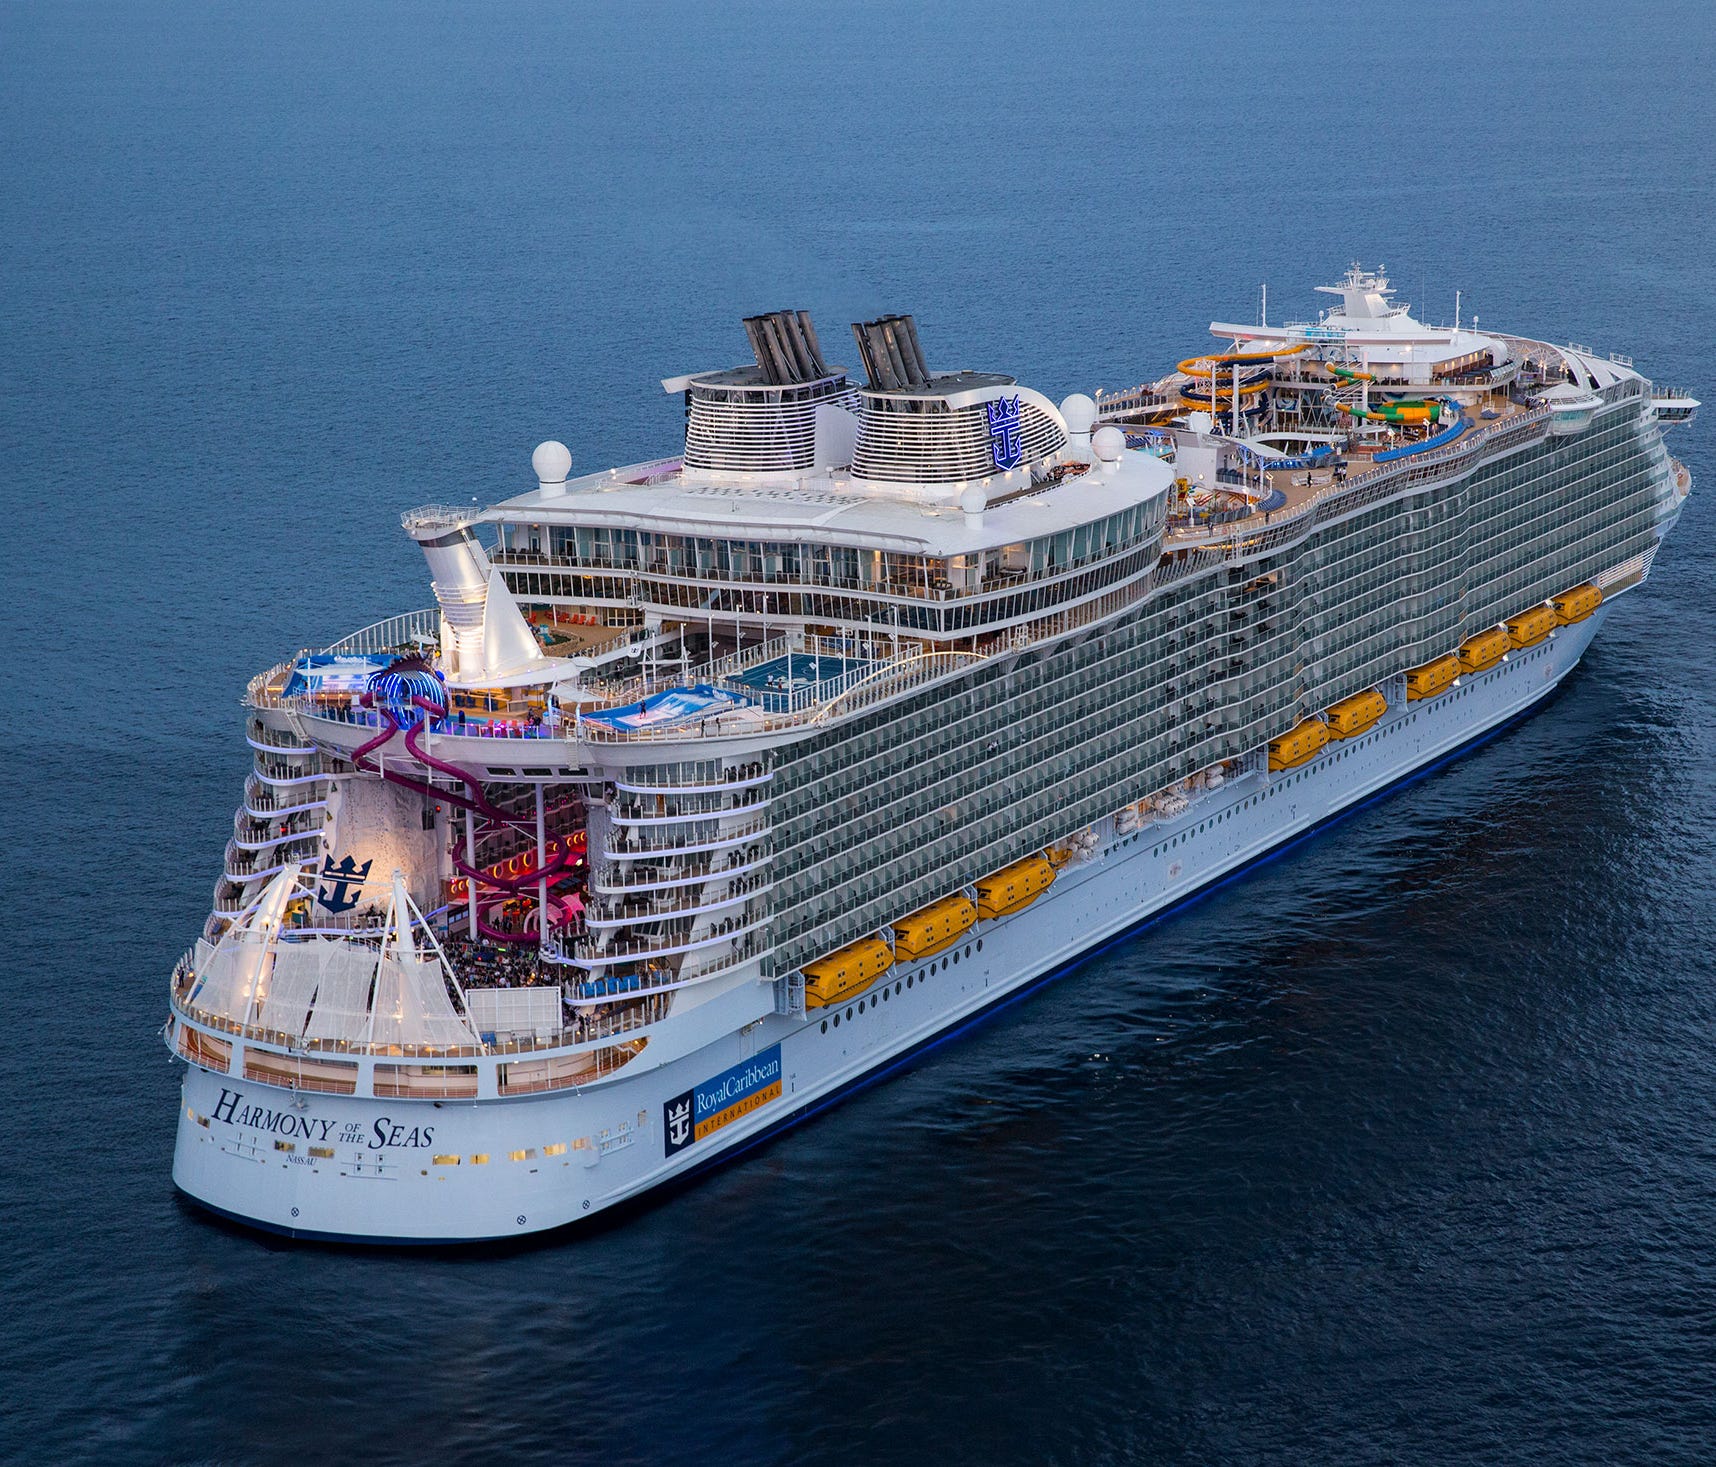 Harmony of the Seas adds everything present on its younger sisters, and then takes it up a notch.